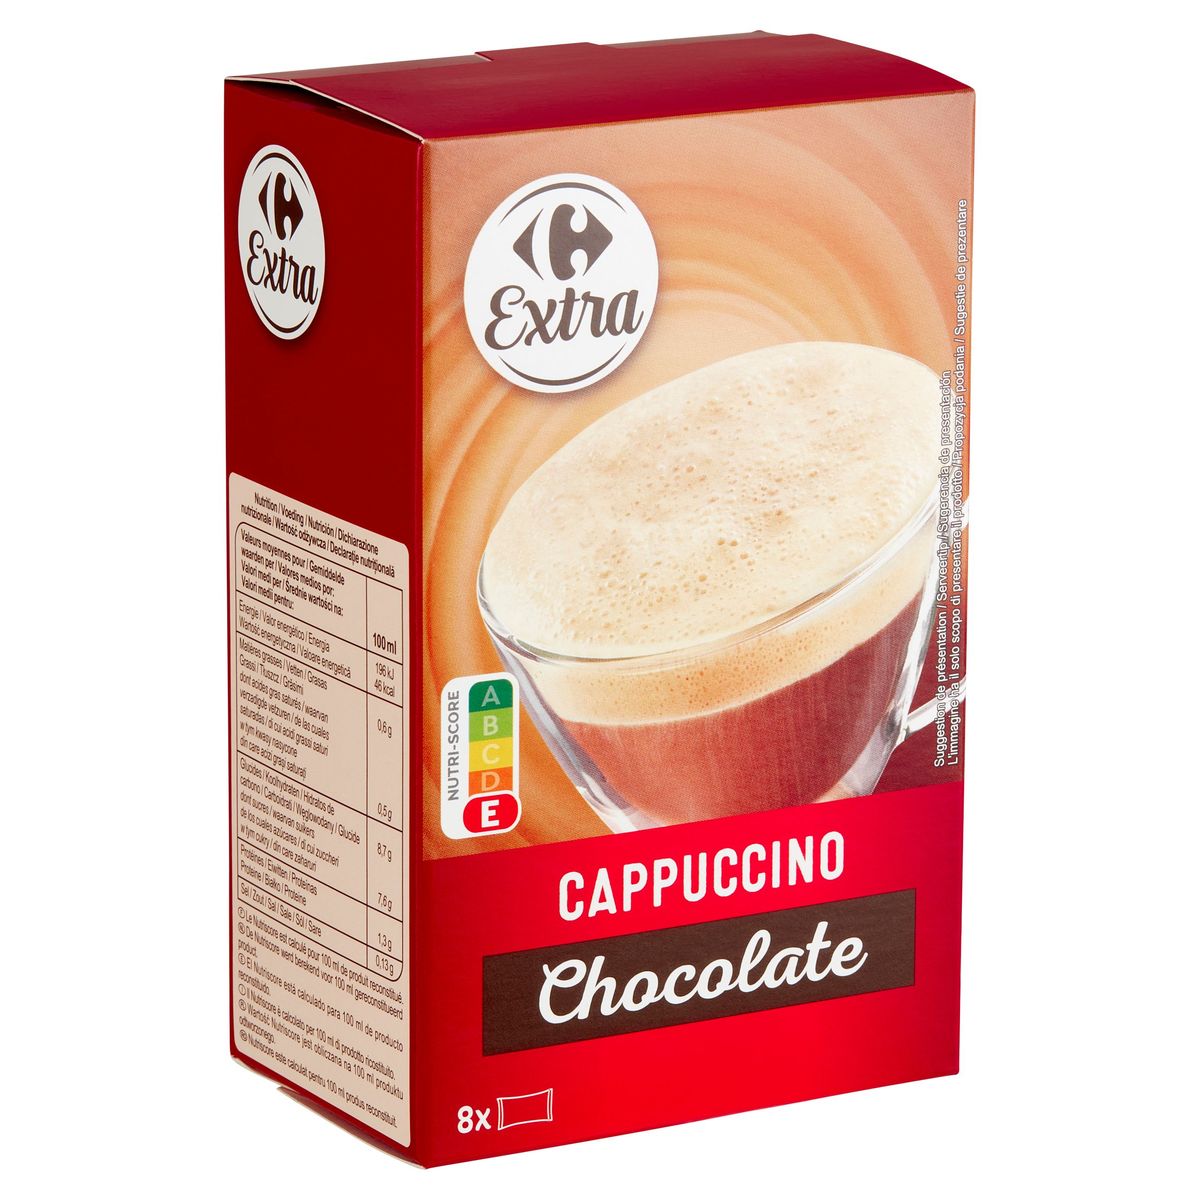 Carrefour Extra Cappuccino 8 x 18 g